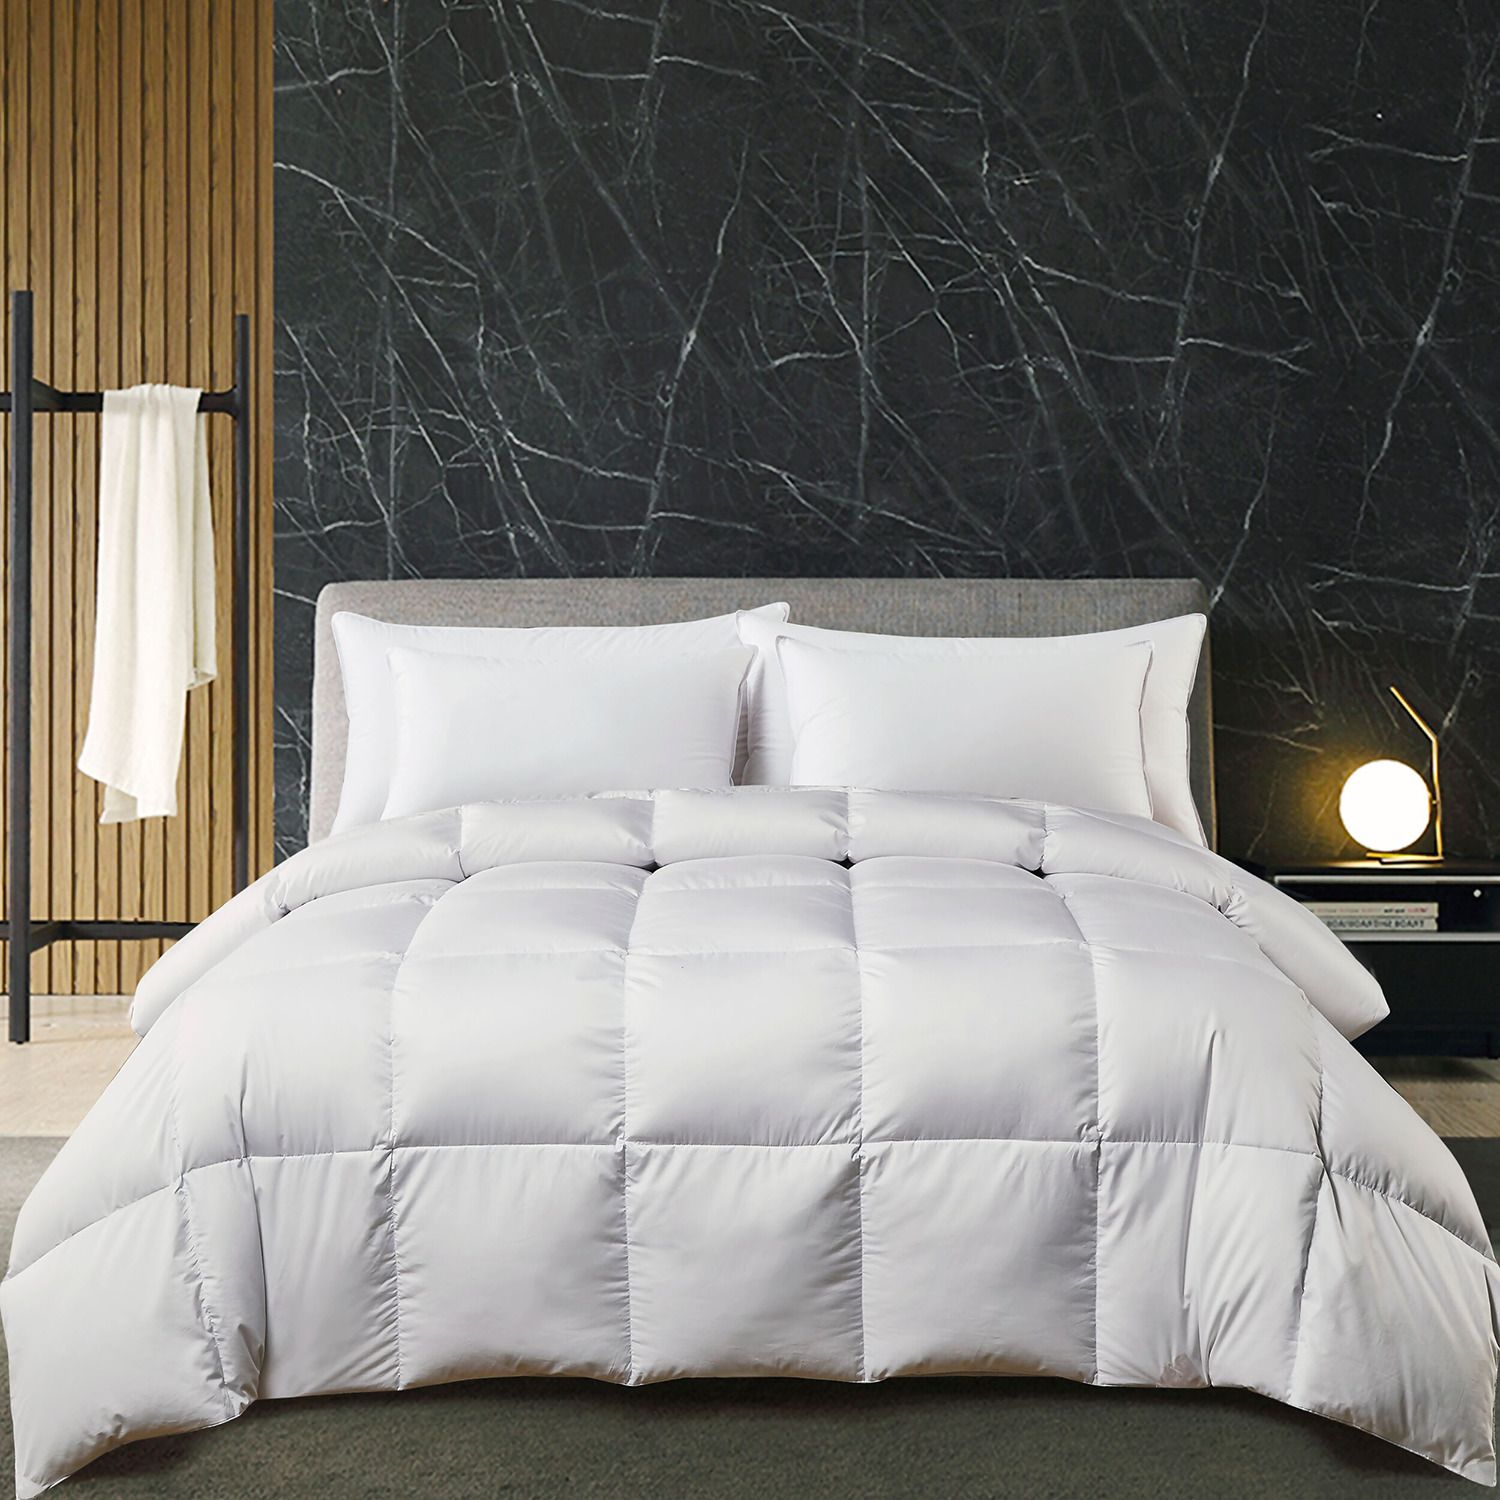 Image for Hotel Suite White Goose All Seasons Comforter at Kohl's.